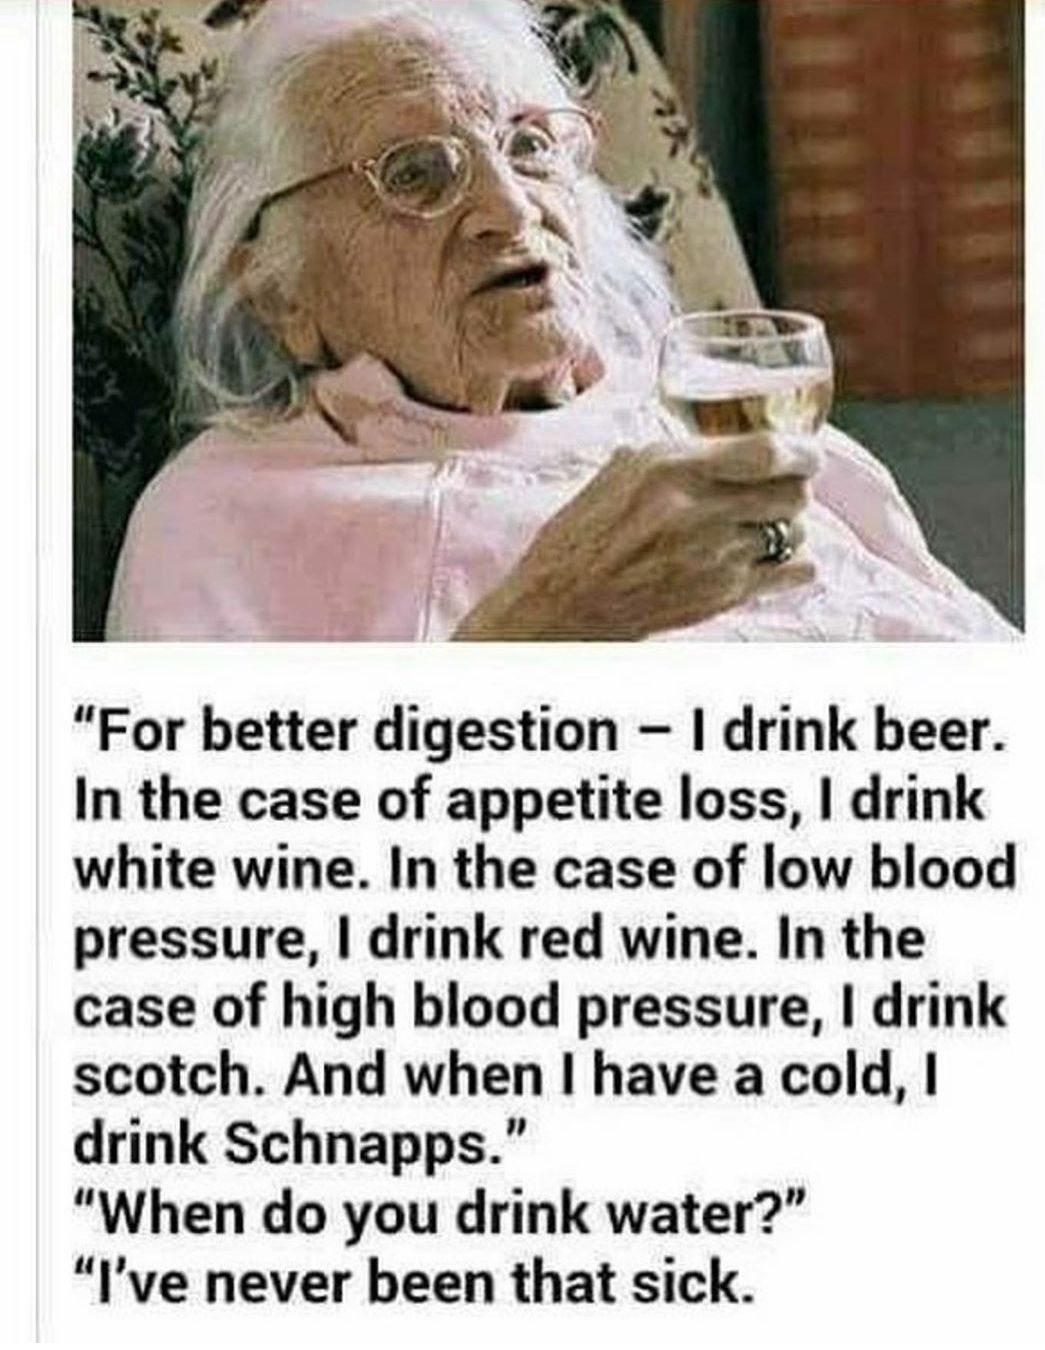 This lady knows.